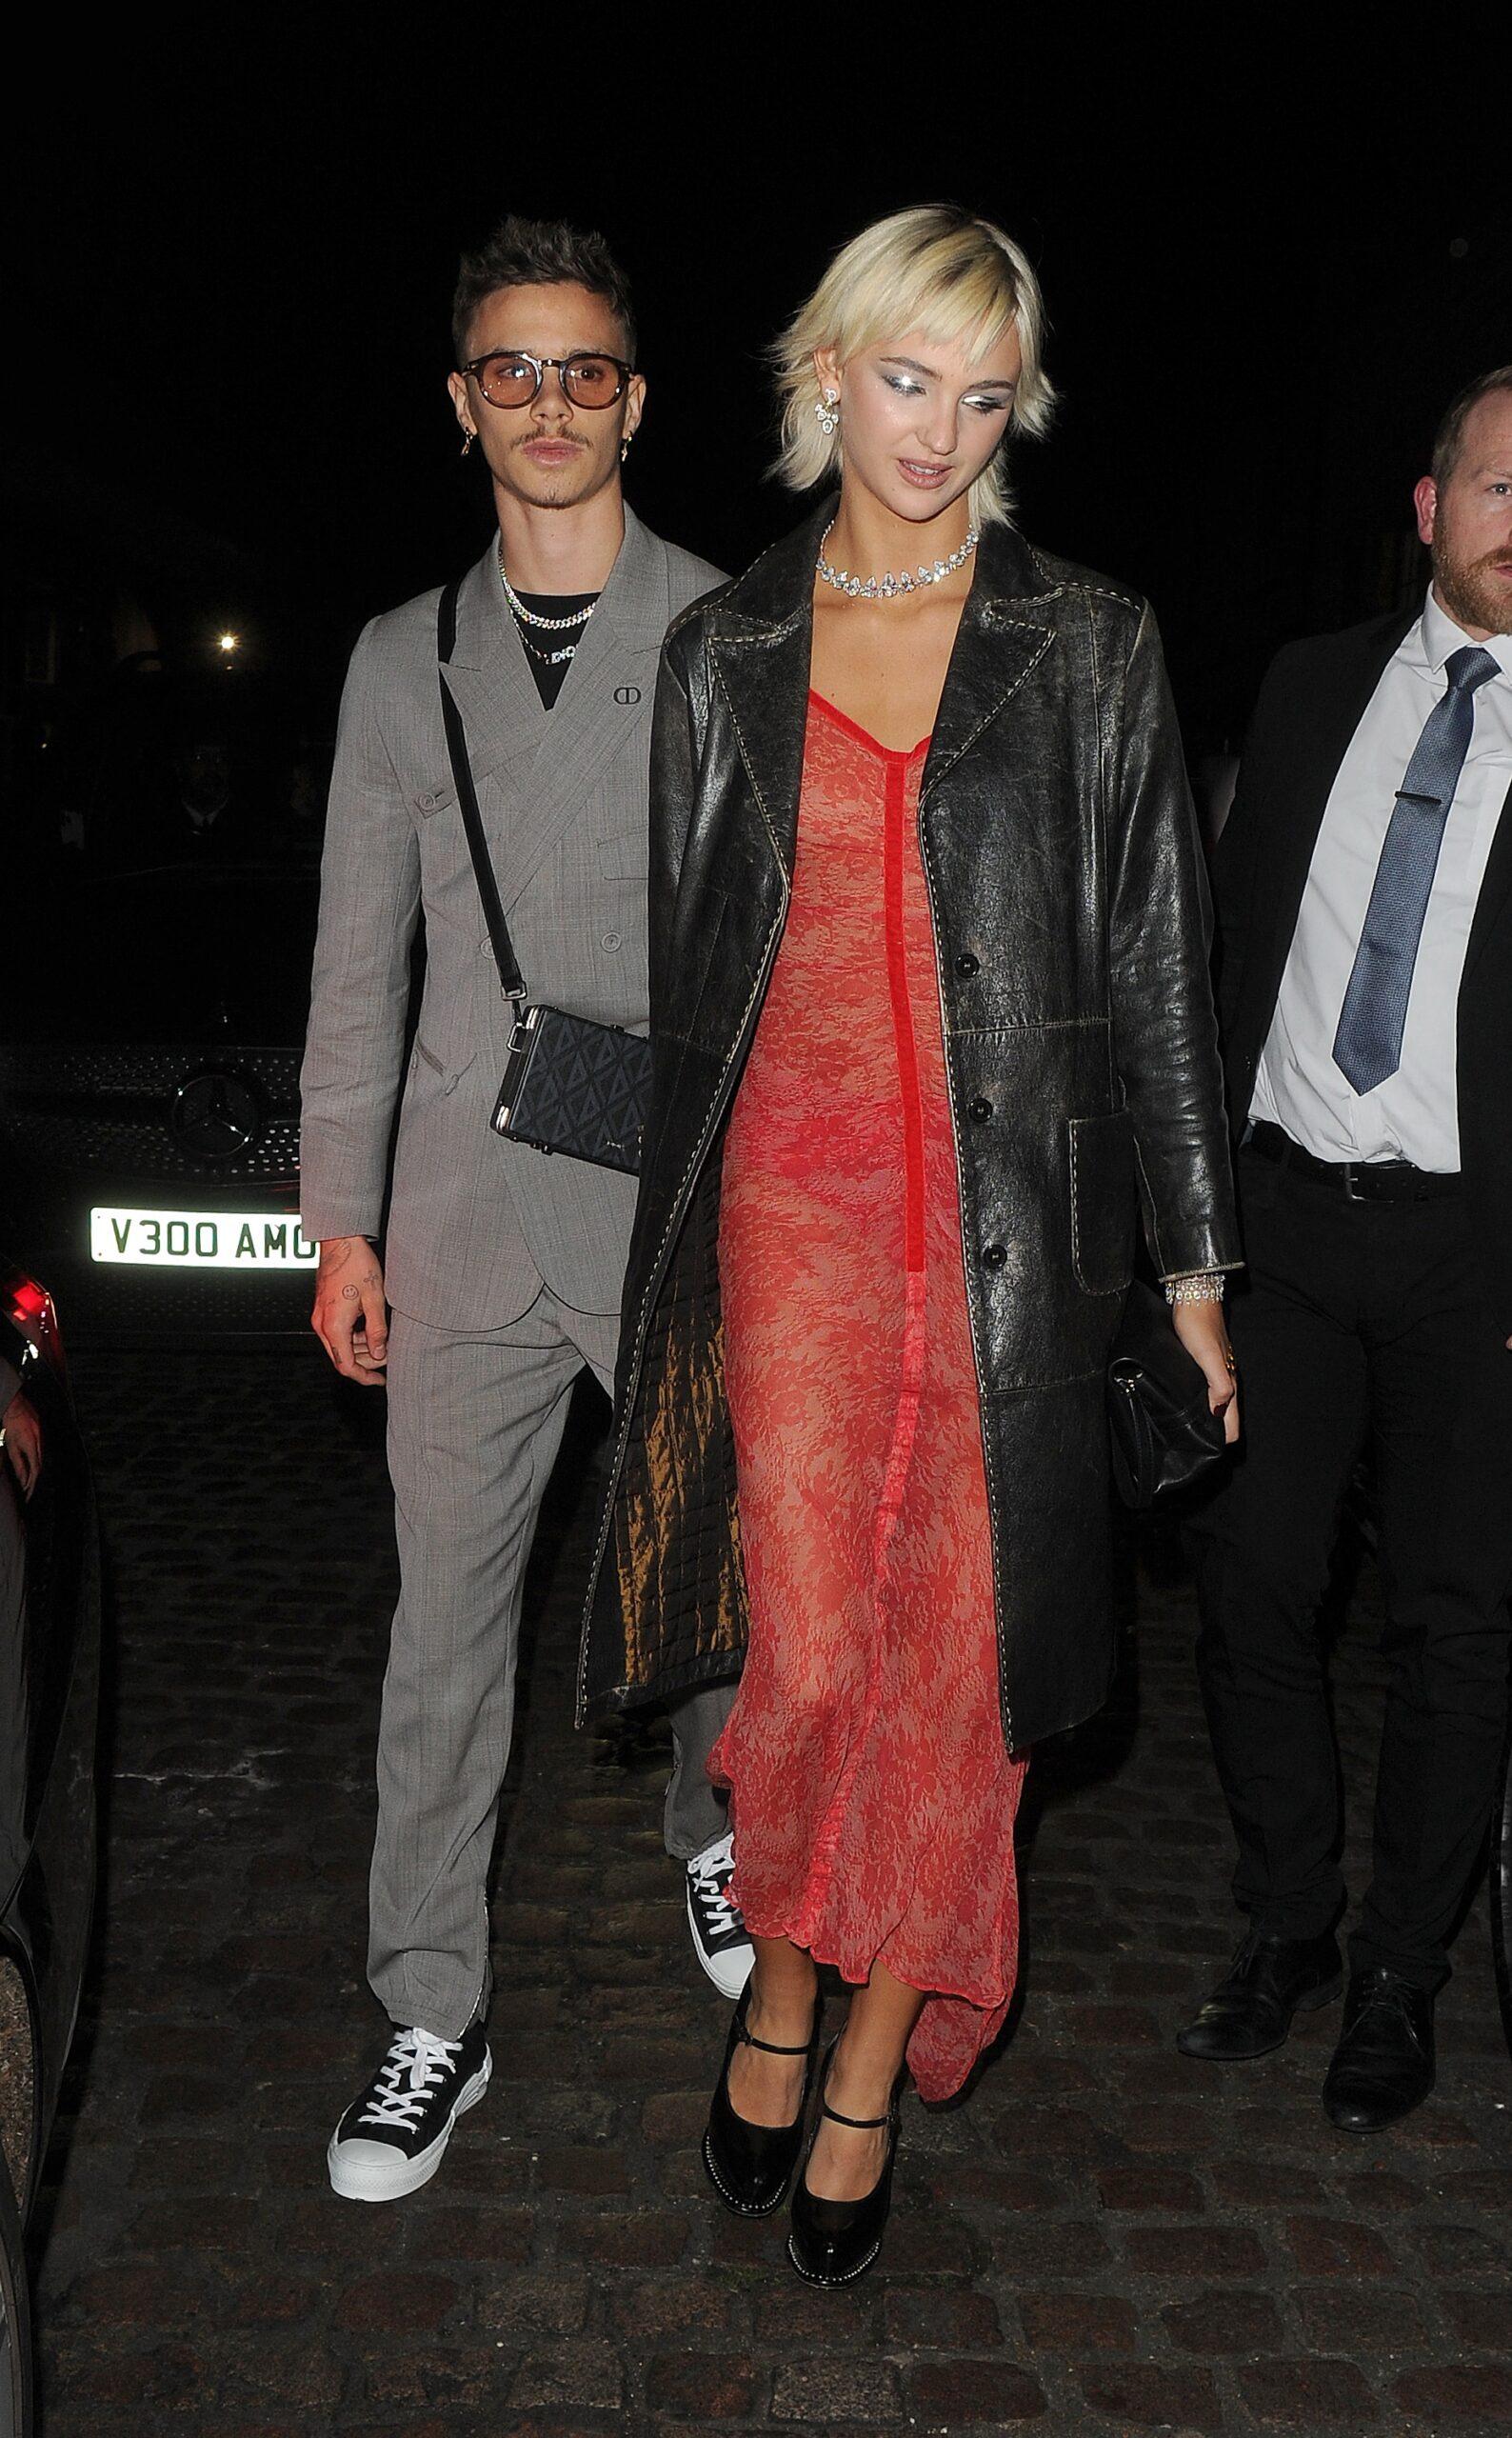 Romeo Beckham and Mia Regan seen leaving Chiltern Firehouse, following an afterparty for the British Fashion Awards 2022. The party ended at 5am.